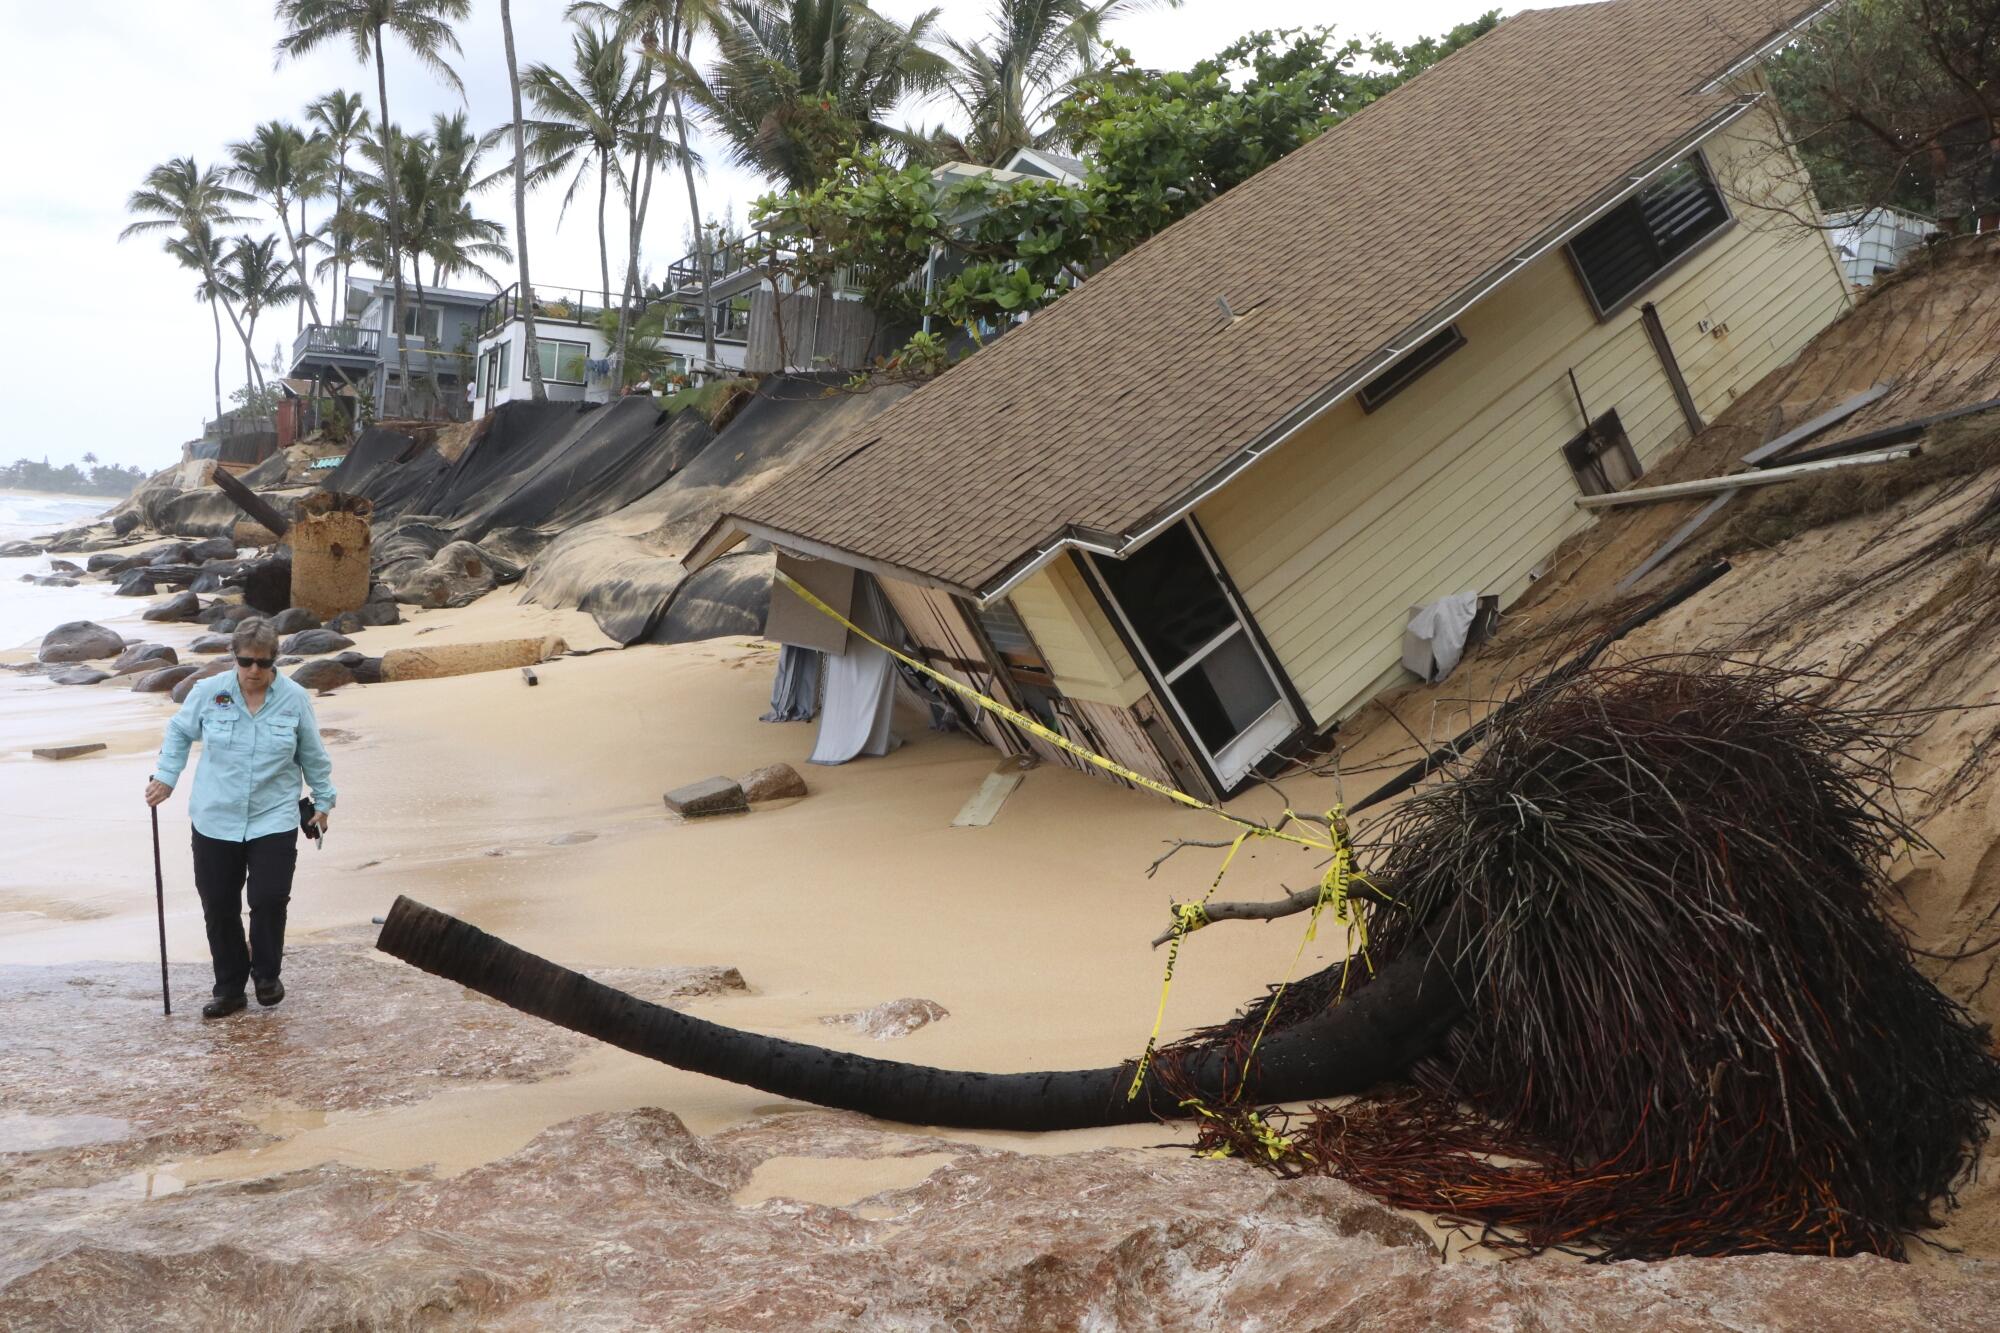 A person with a walking stick passes a home collapsed onto a beach while palm trees stand nearby and one lies on the sand.